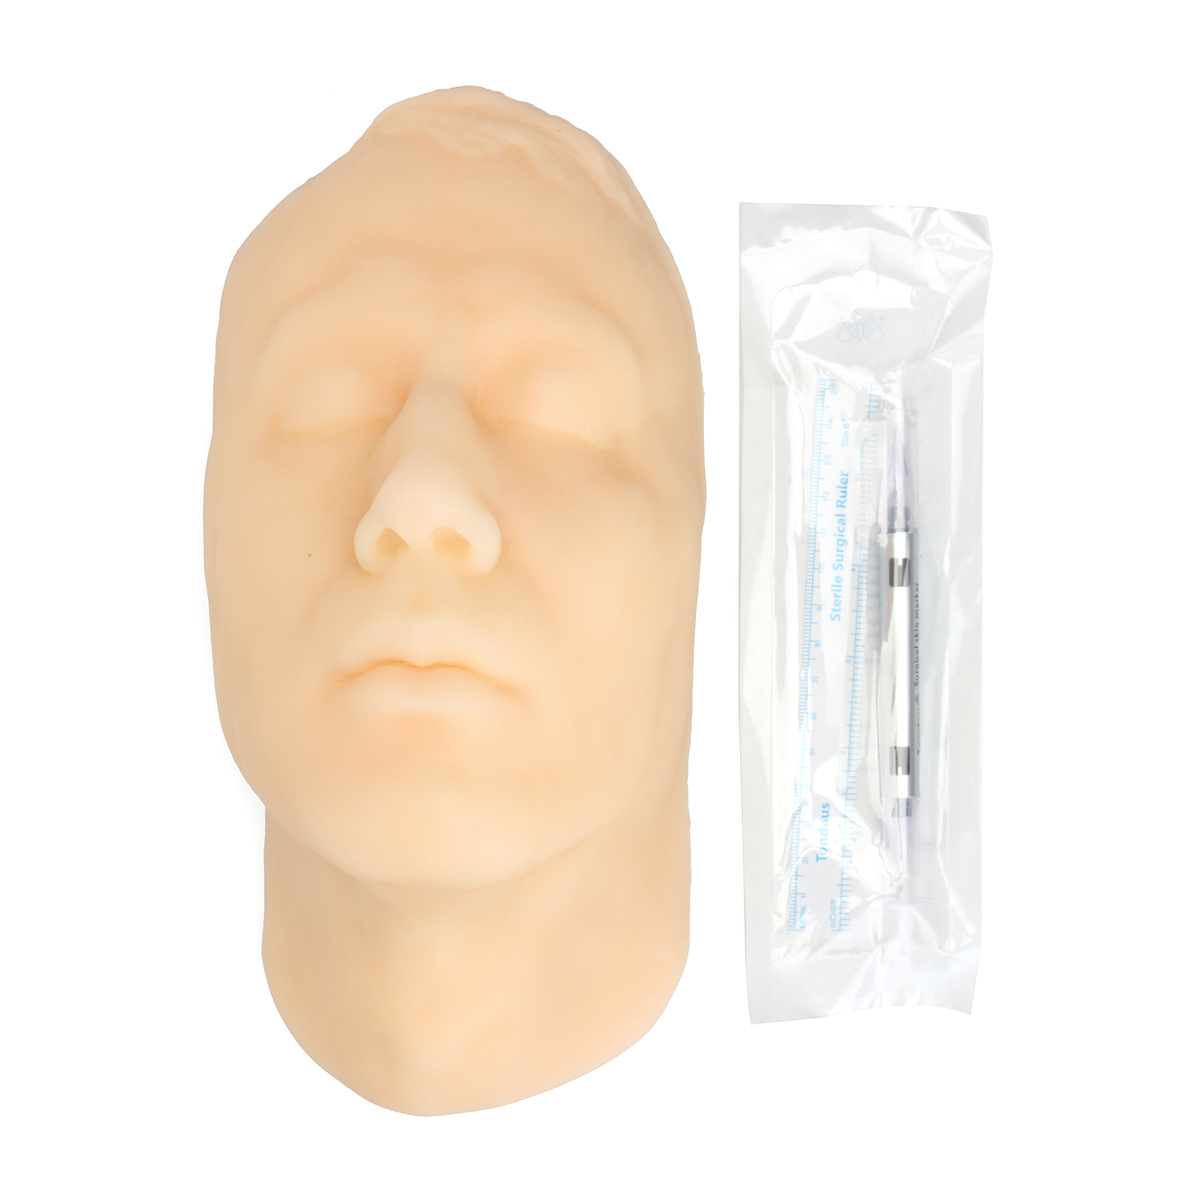 Silicone-Head-Injection-Skin-Suture-Surgery-Teaching-Practice-Model-1244491-1